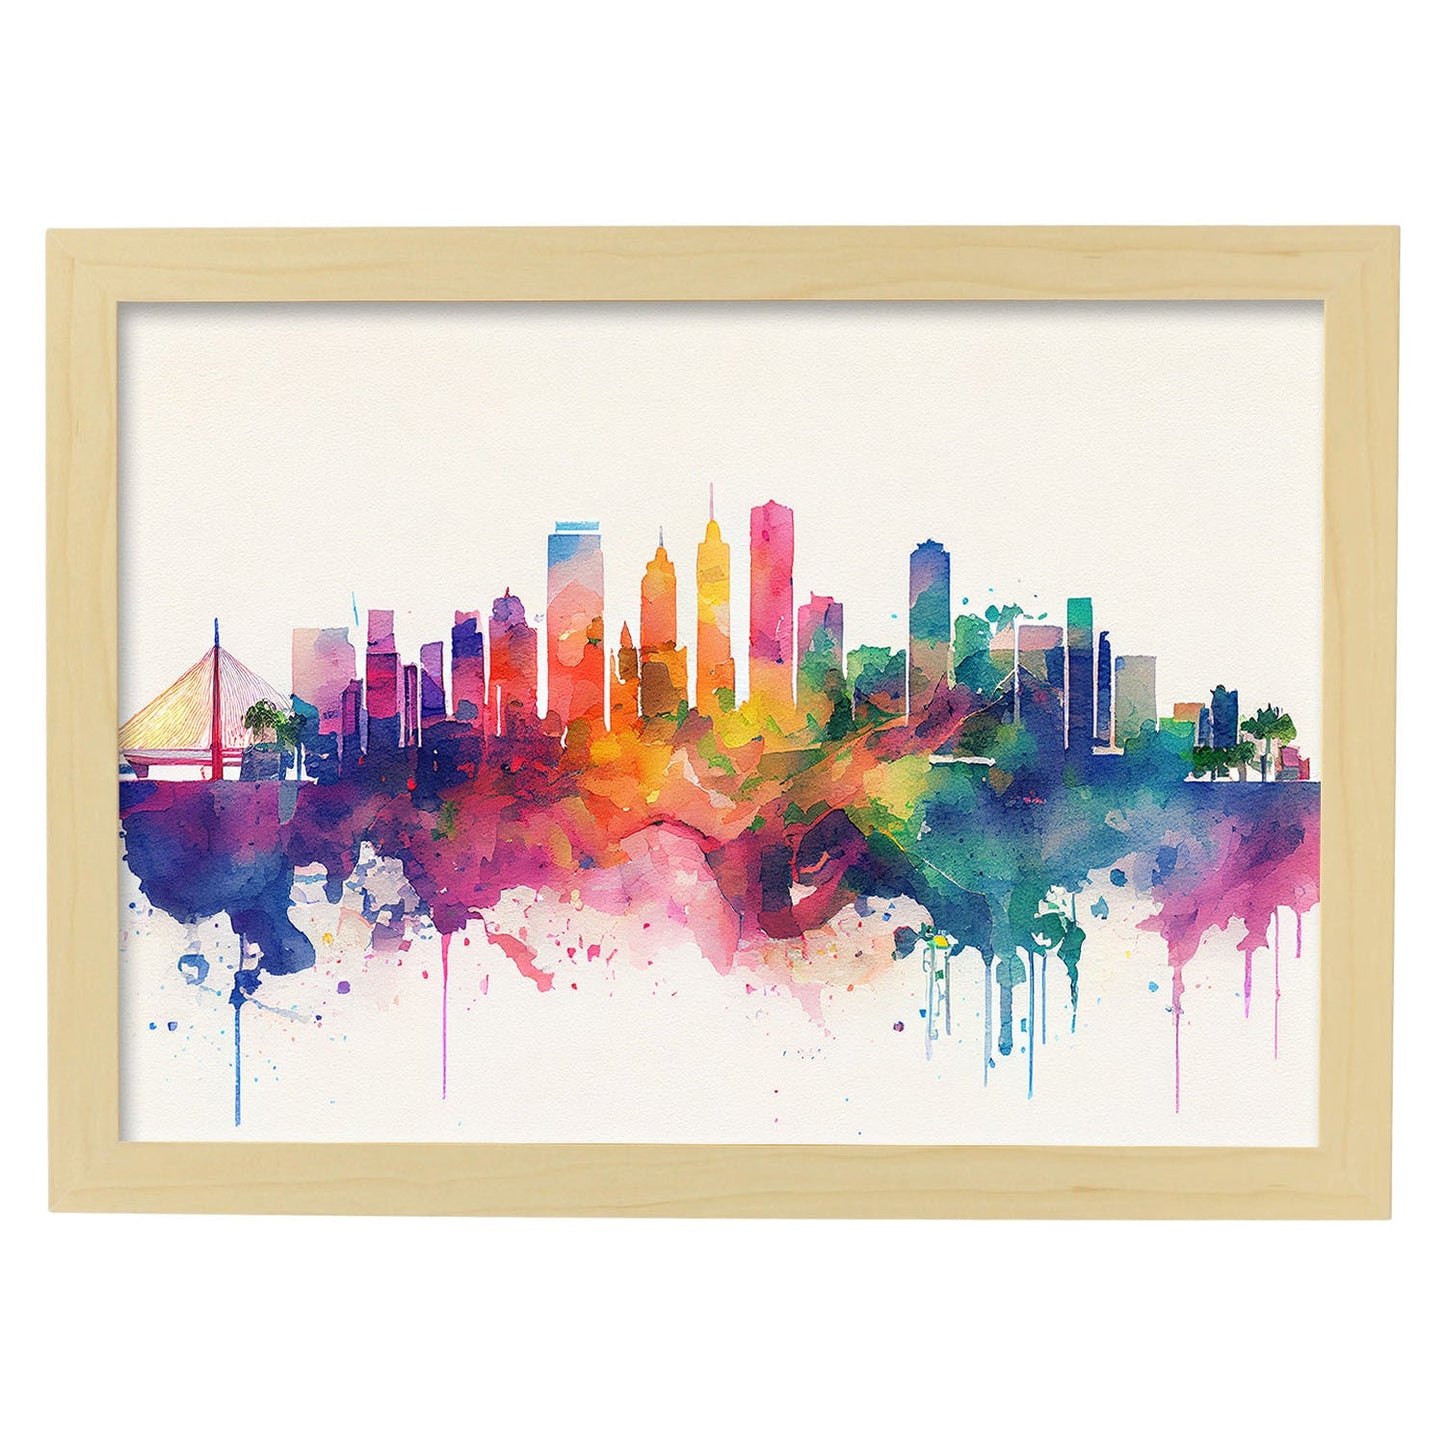 Nacnic watercolor of a skyline of the city of Manila_1. Aesthetic Wall Art Prints for Bedroom or Living Room Design.-Artwork-Nacnic-A4-Marco Madera Clara-Nacnic Estudio SL